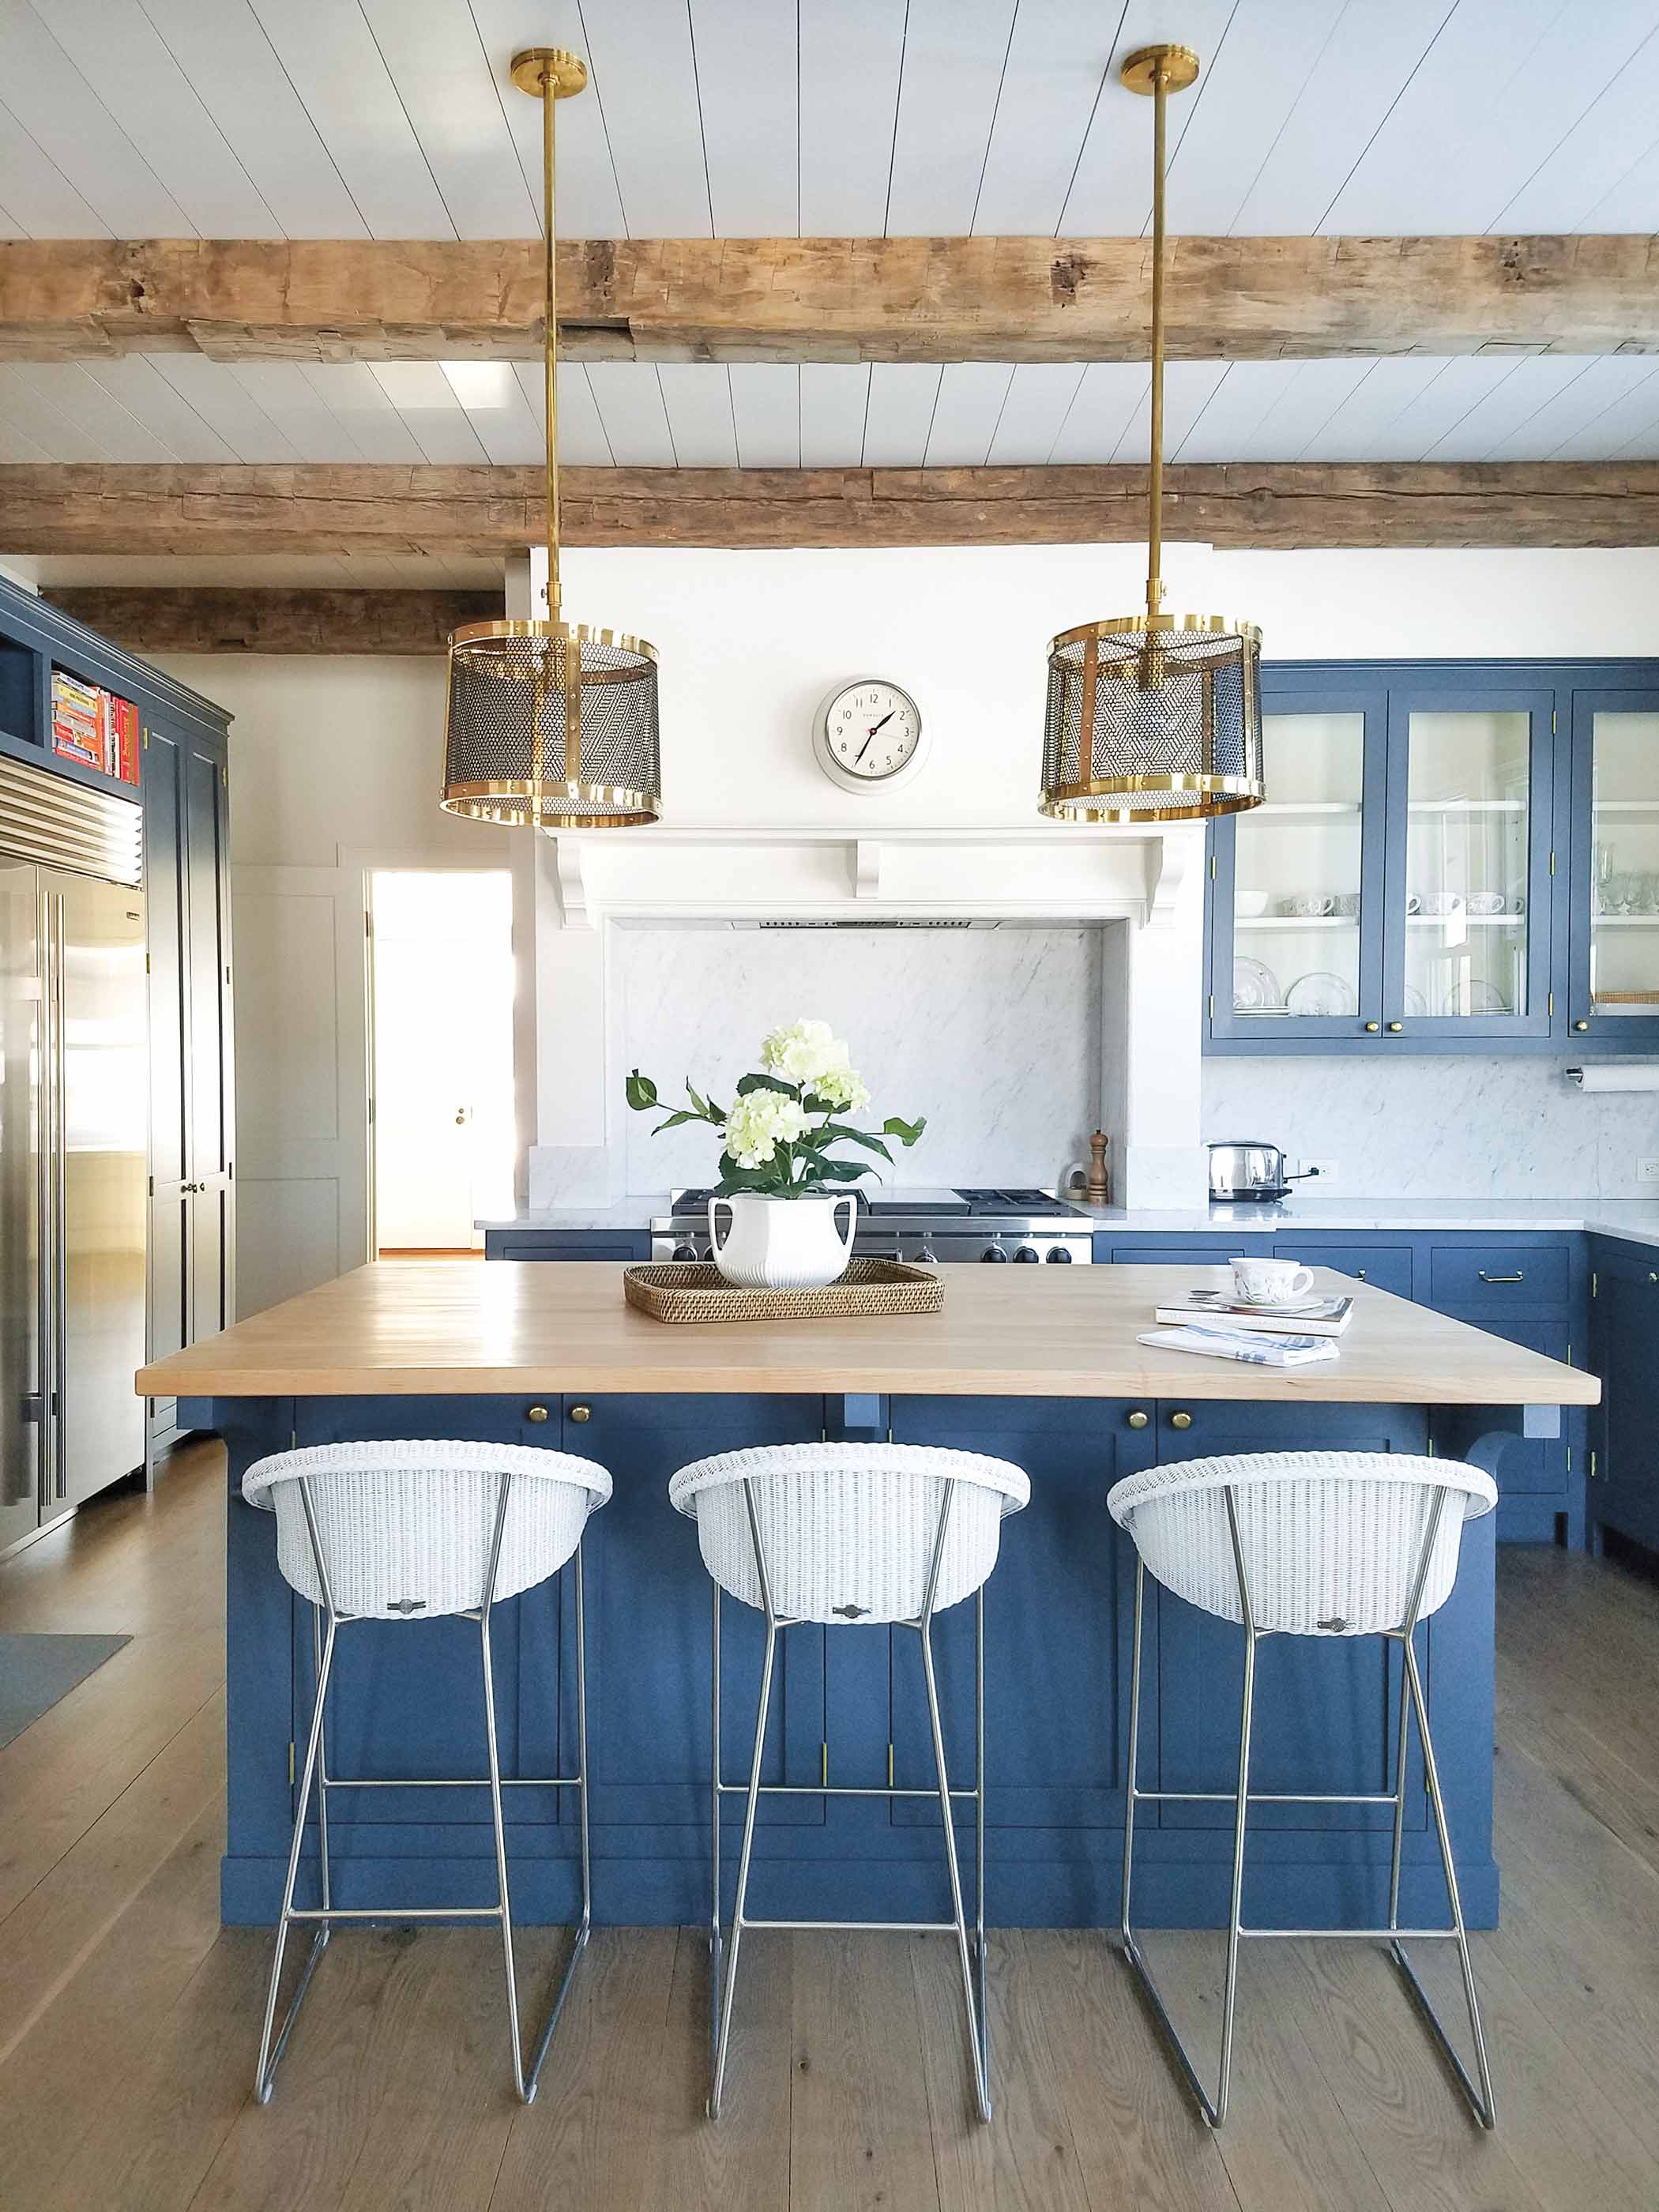 A blue island brings a pop of color to a mostly neutral kitchen 